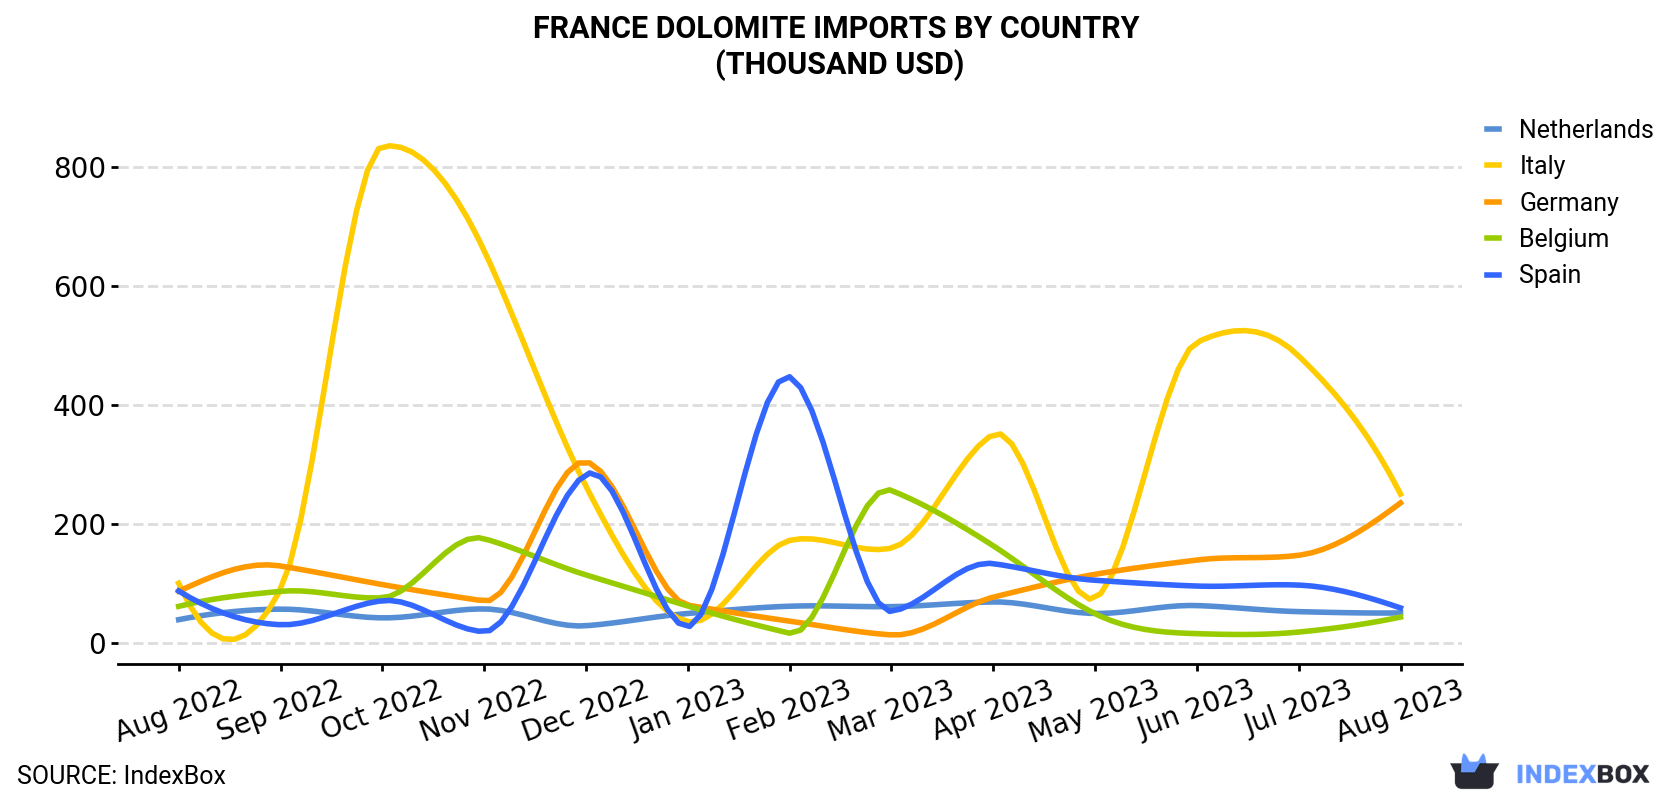 France Dolomite Imports By Country (Thousand USD)